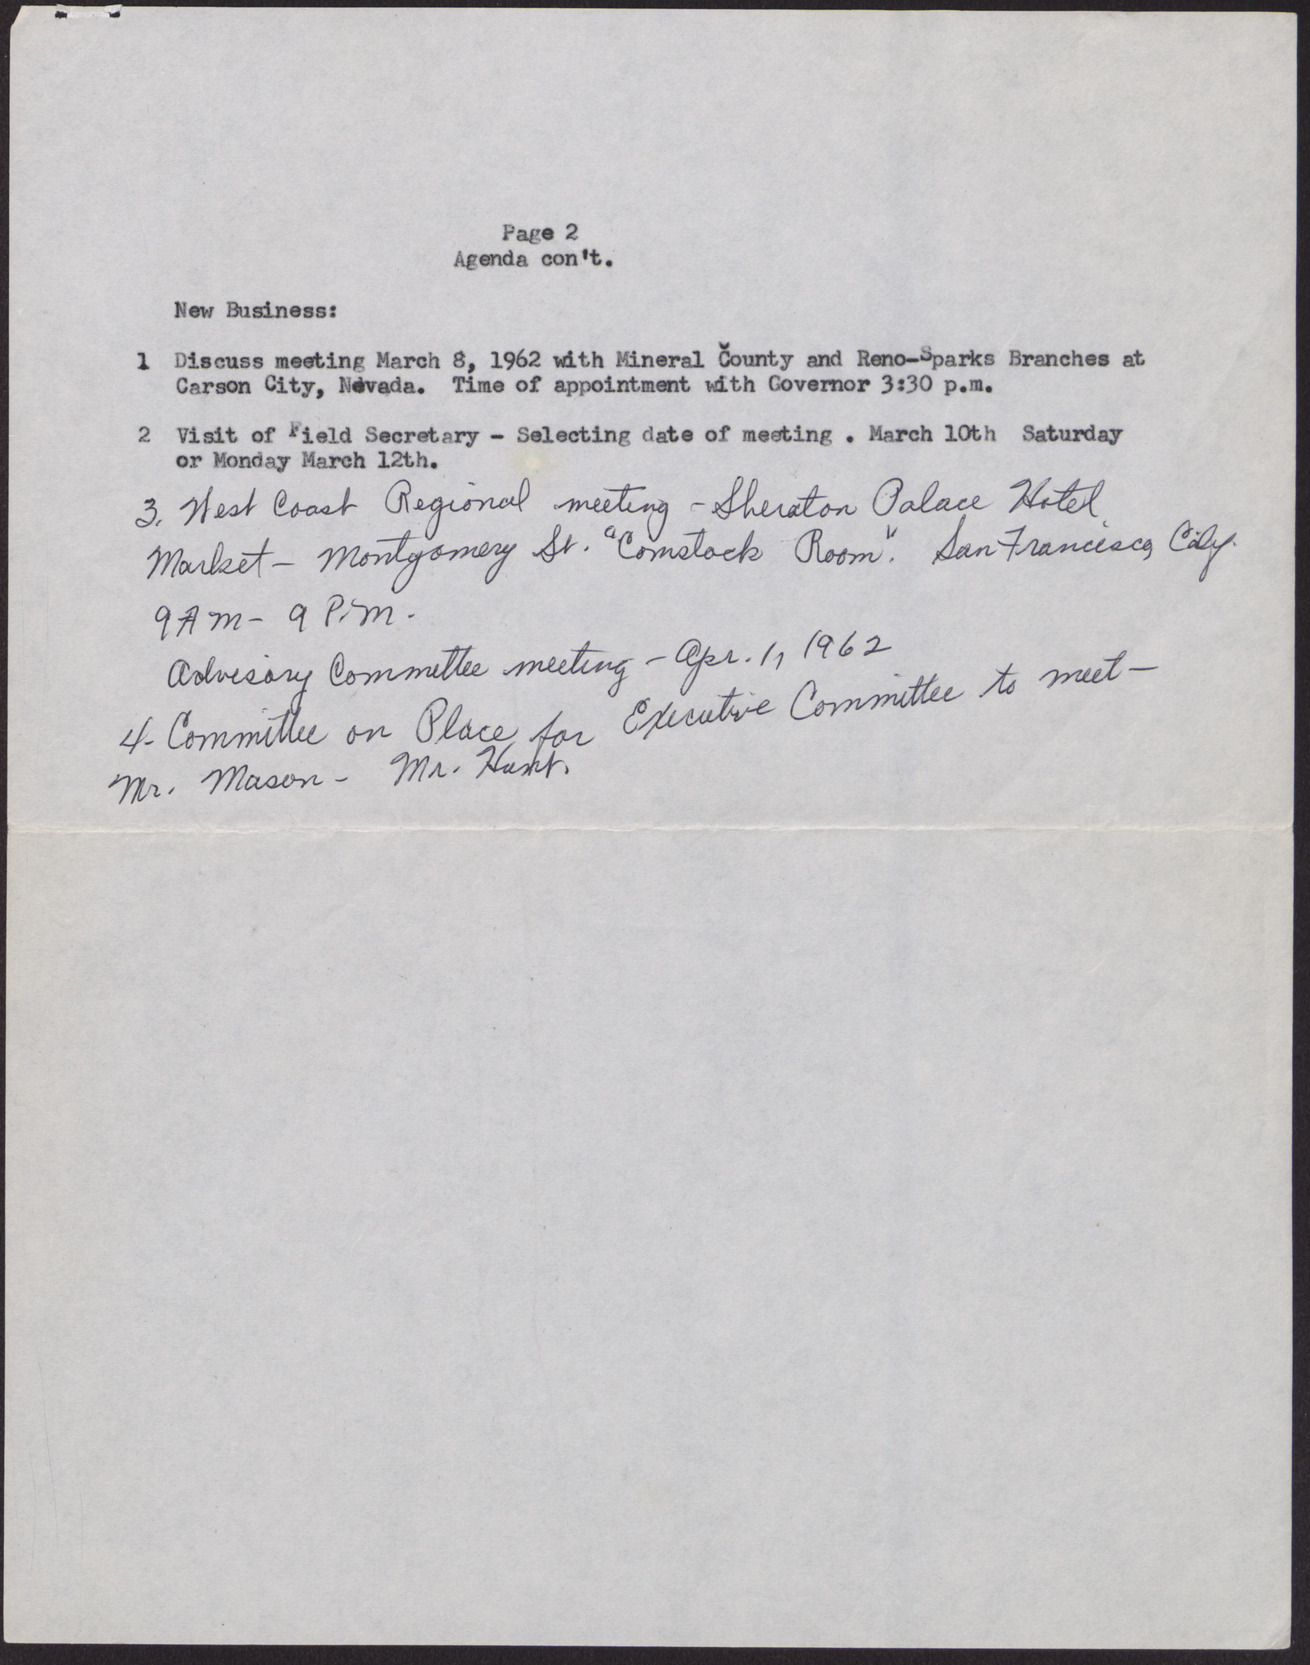 Agenda - Executive Committee Meeting (2 pages), February 28, 1962, page 2